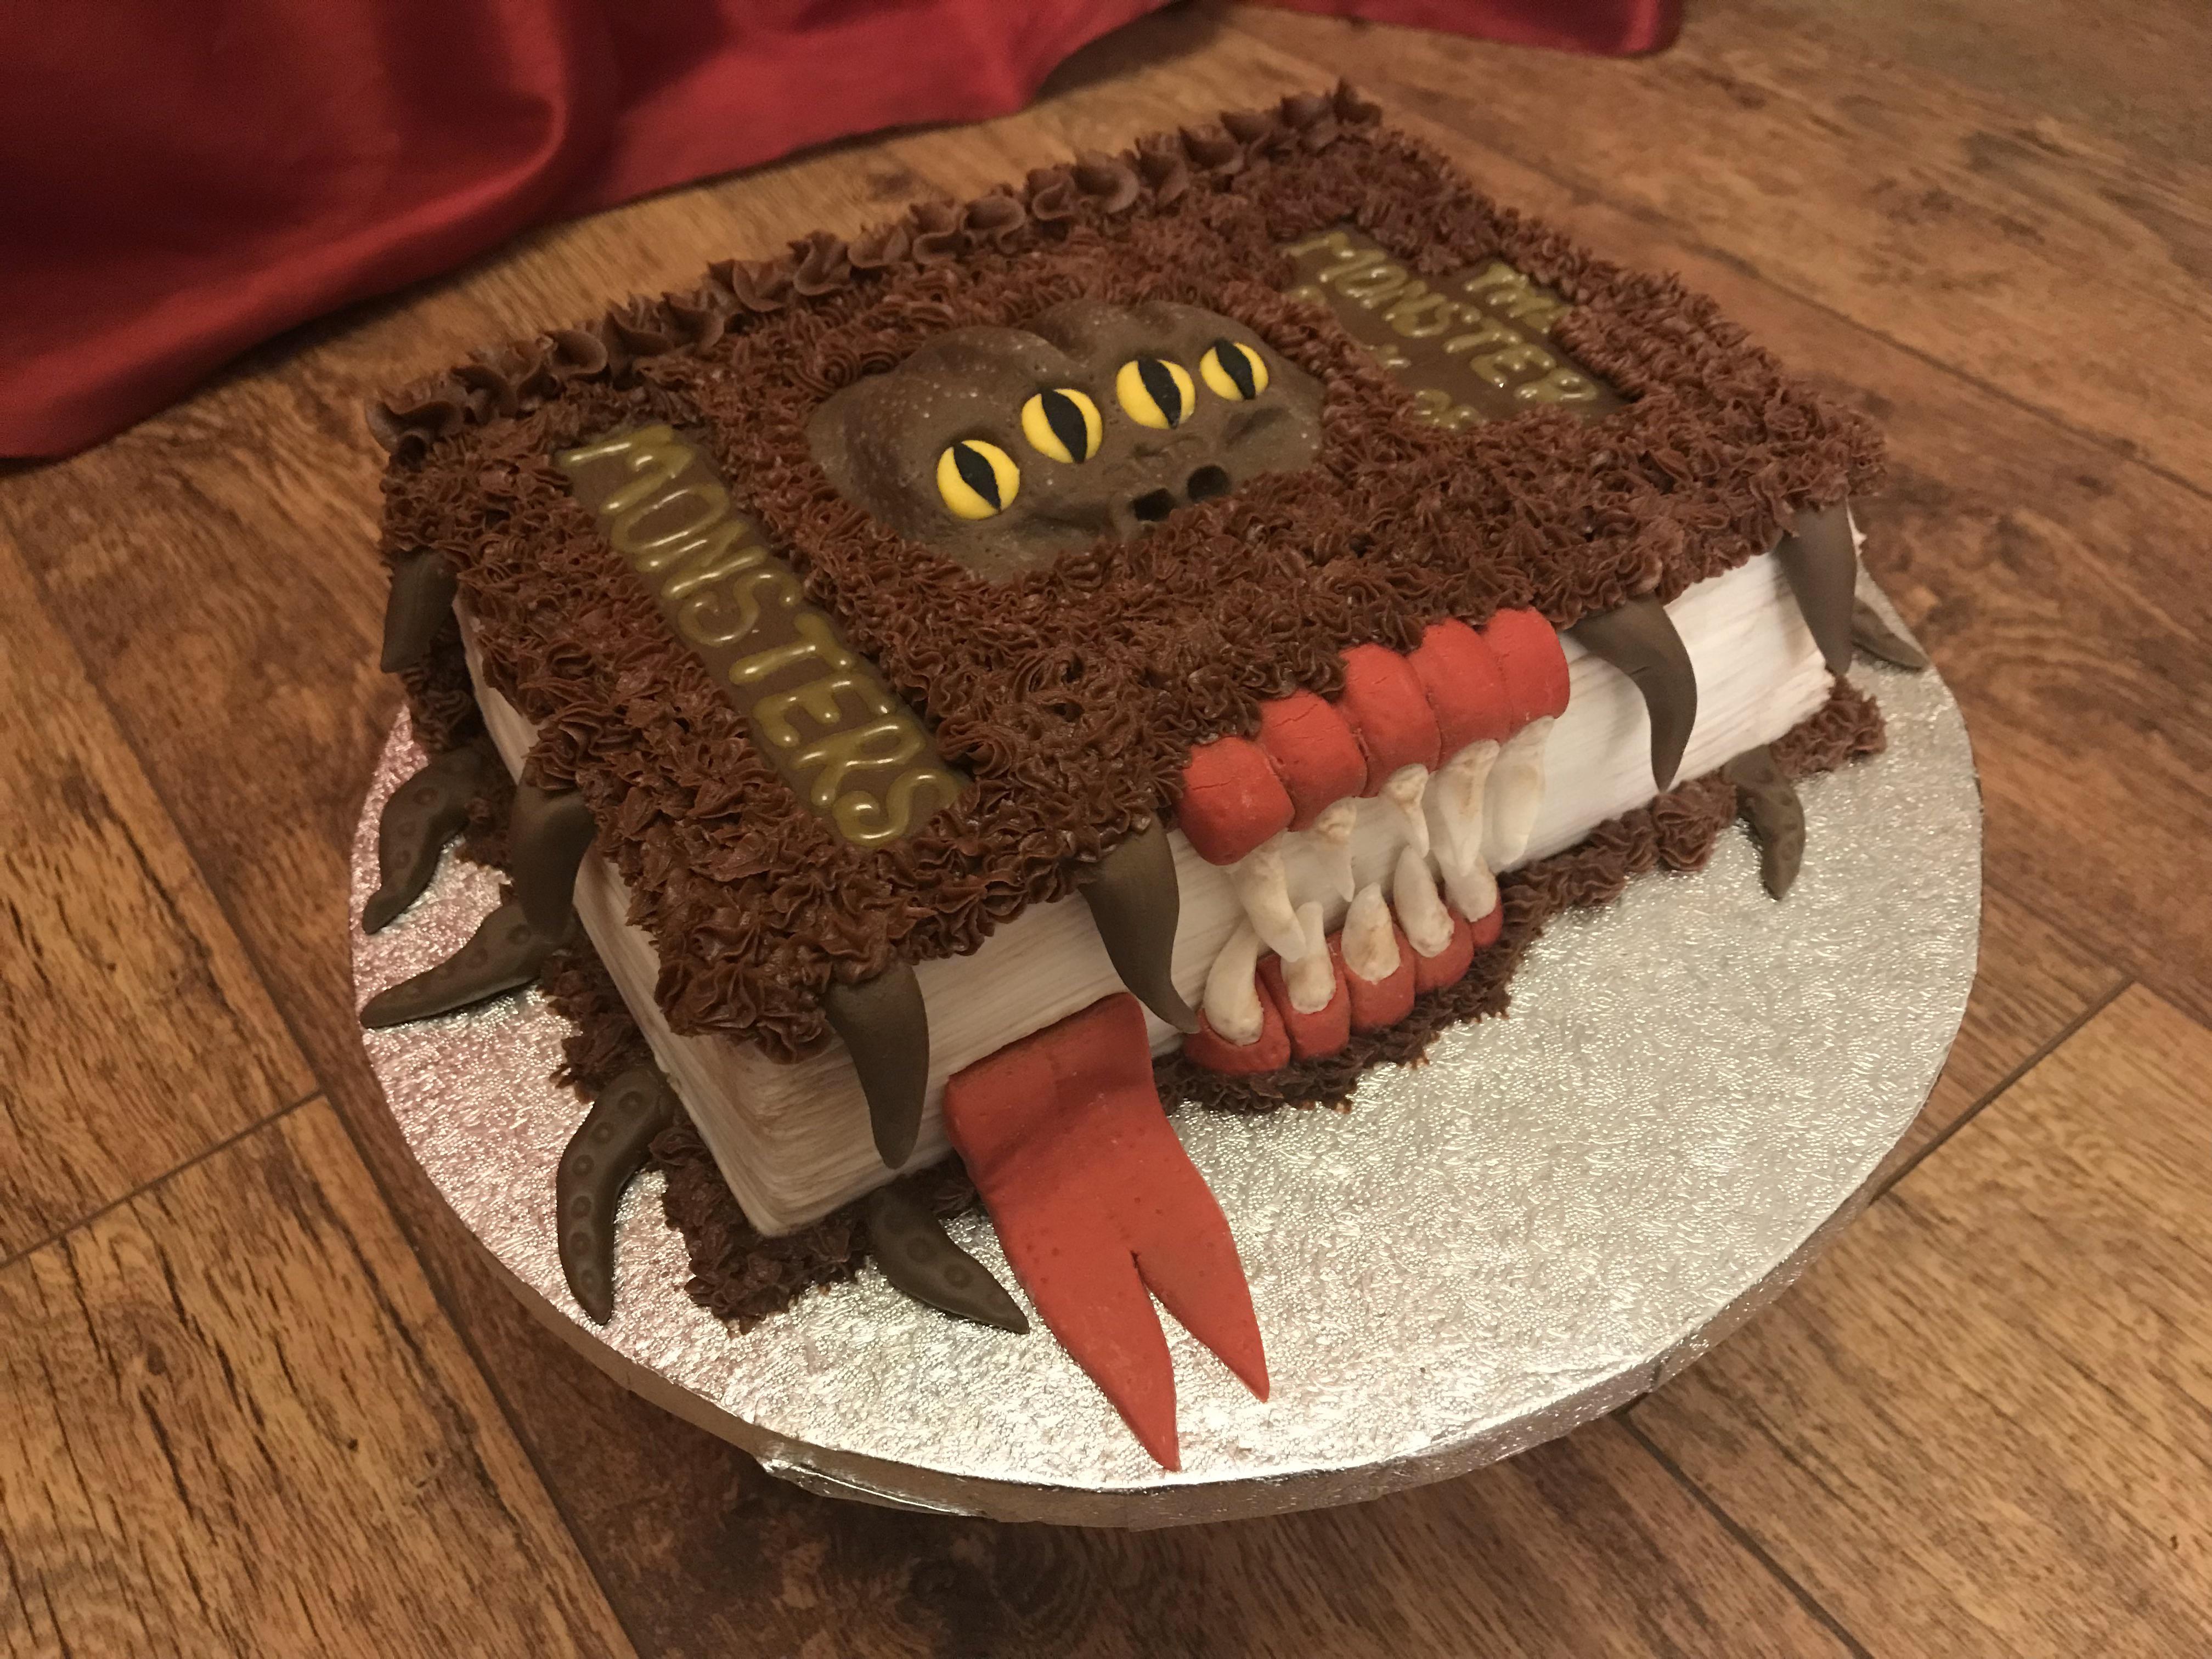 The Monster Book Of Monsters [The Cake]